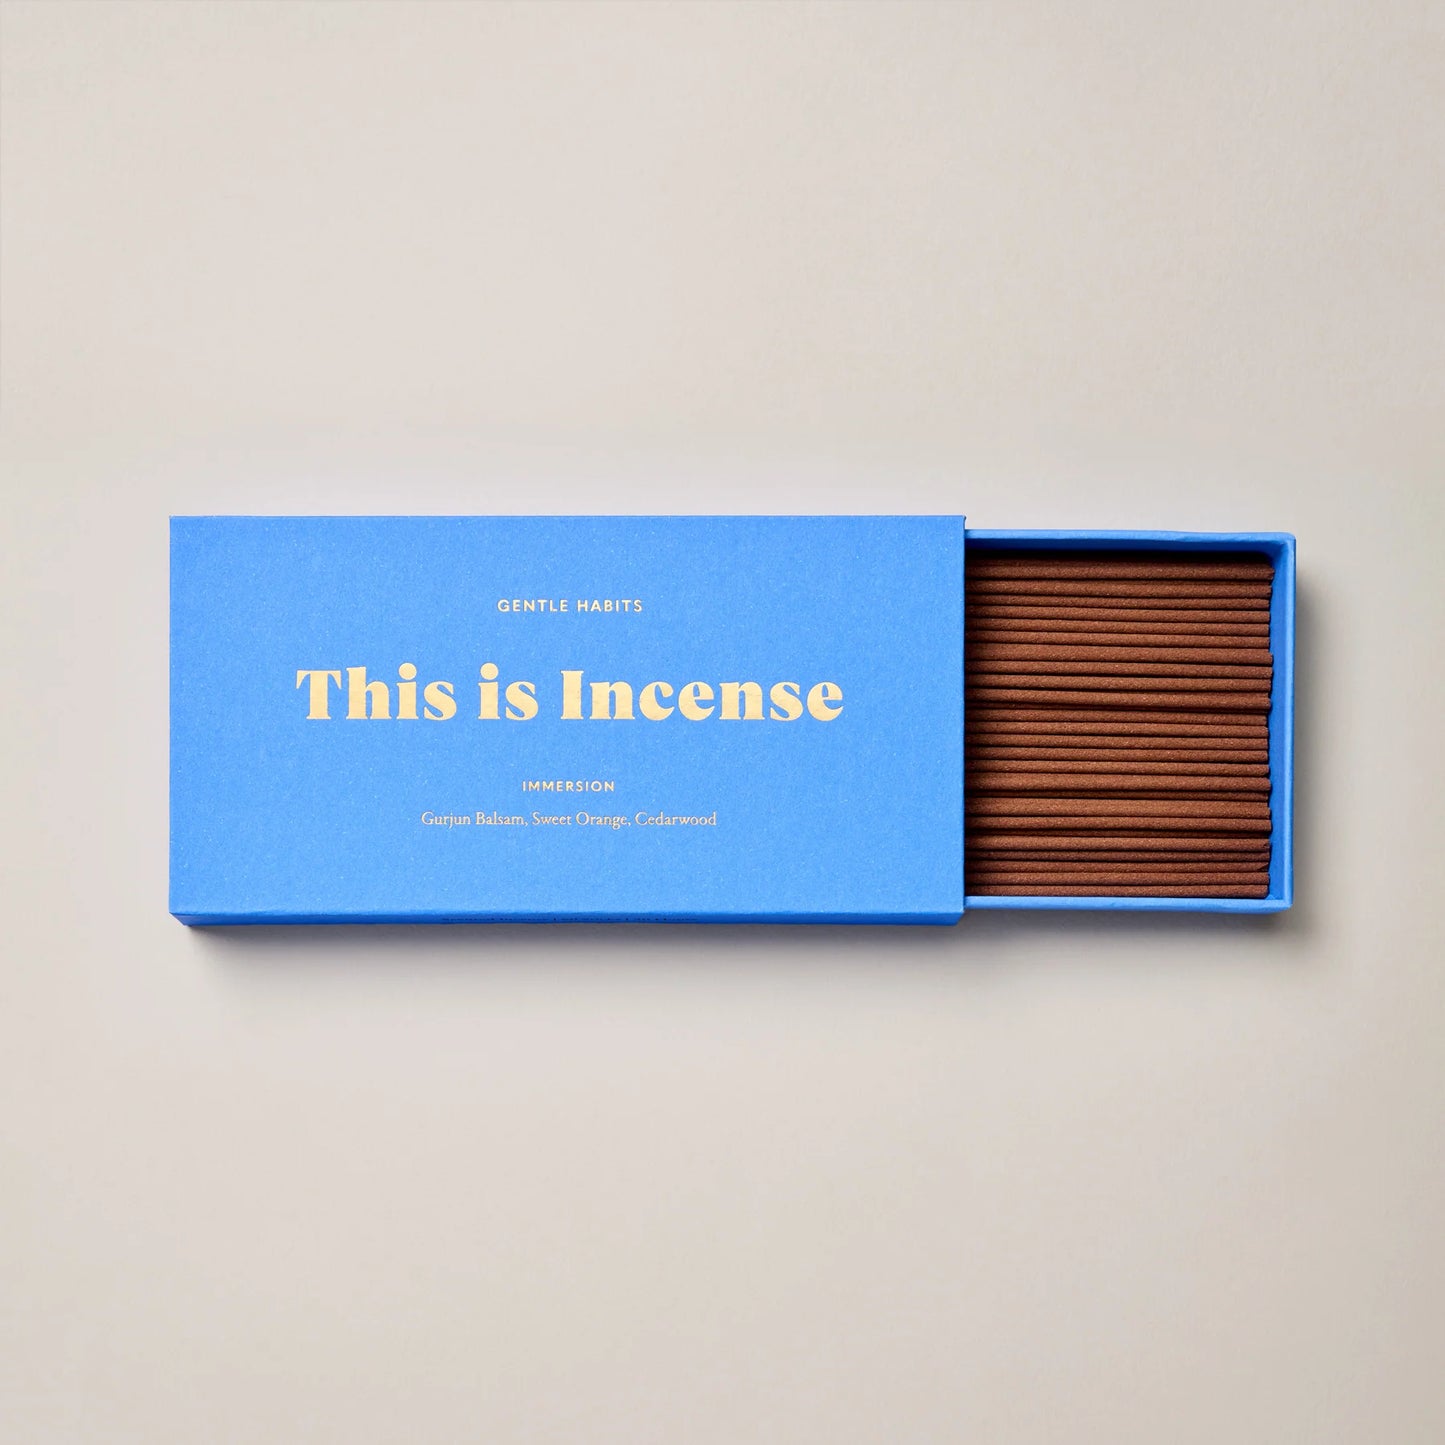 This is Incense - Immersion Incense